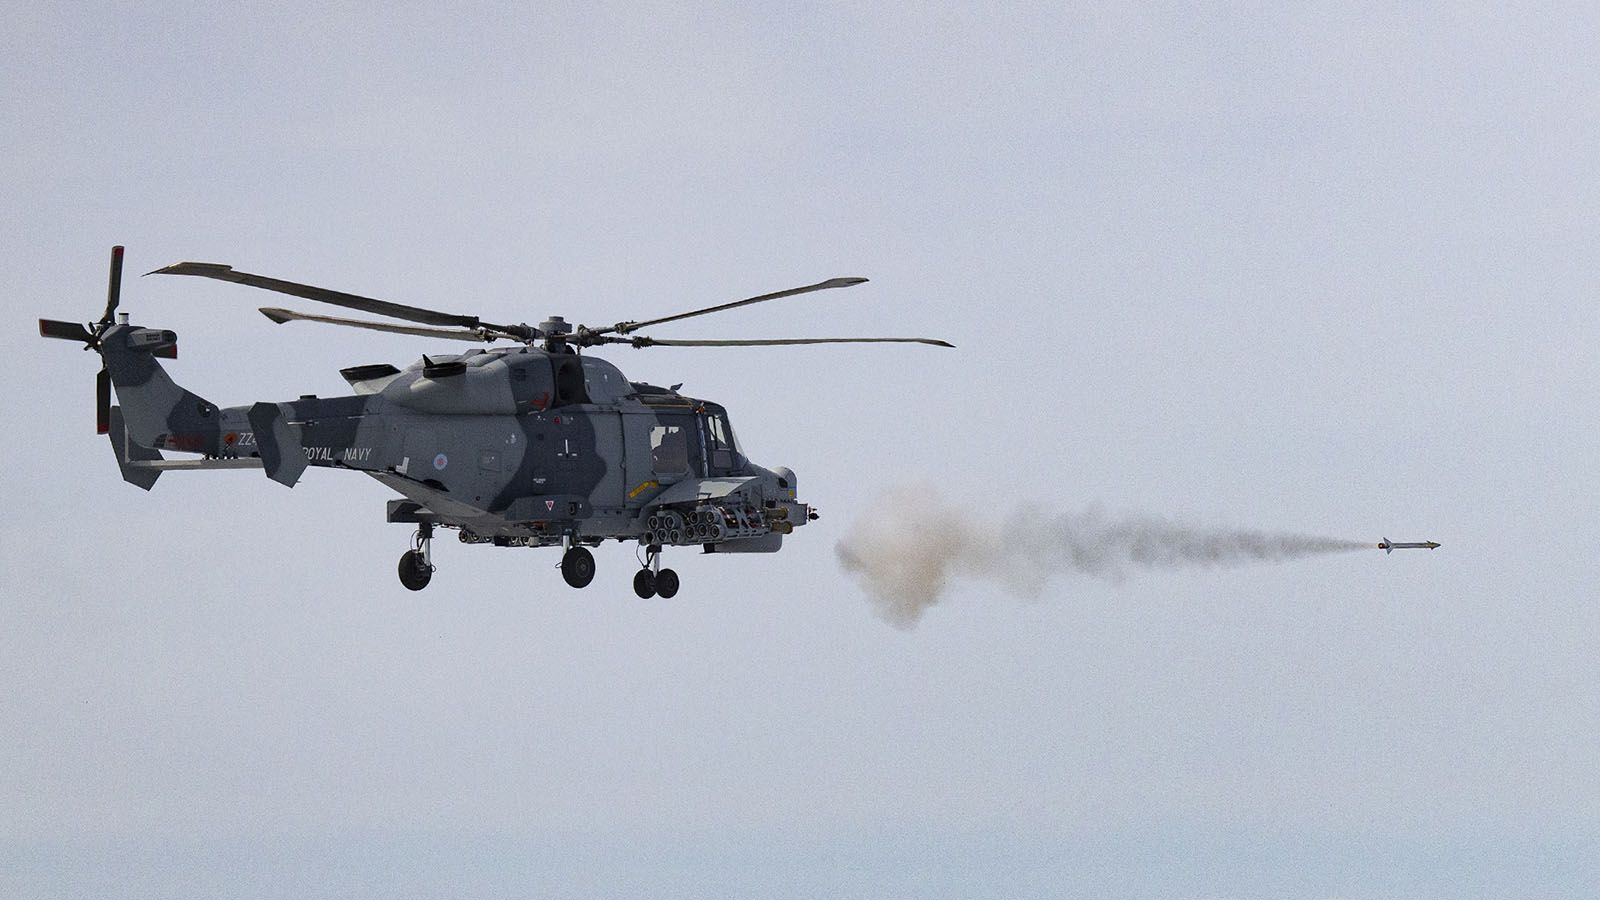 Royal Navy Conducts Test Firing Of New Martlet Missile From Wildcat Helicopter